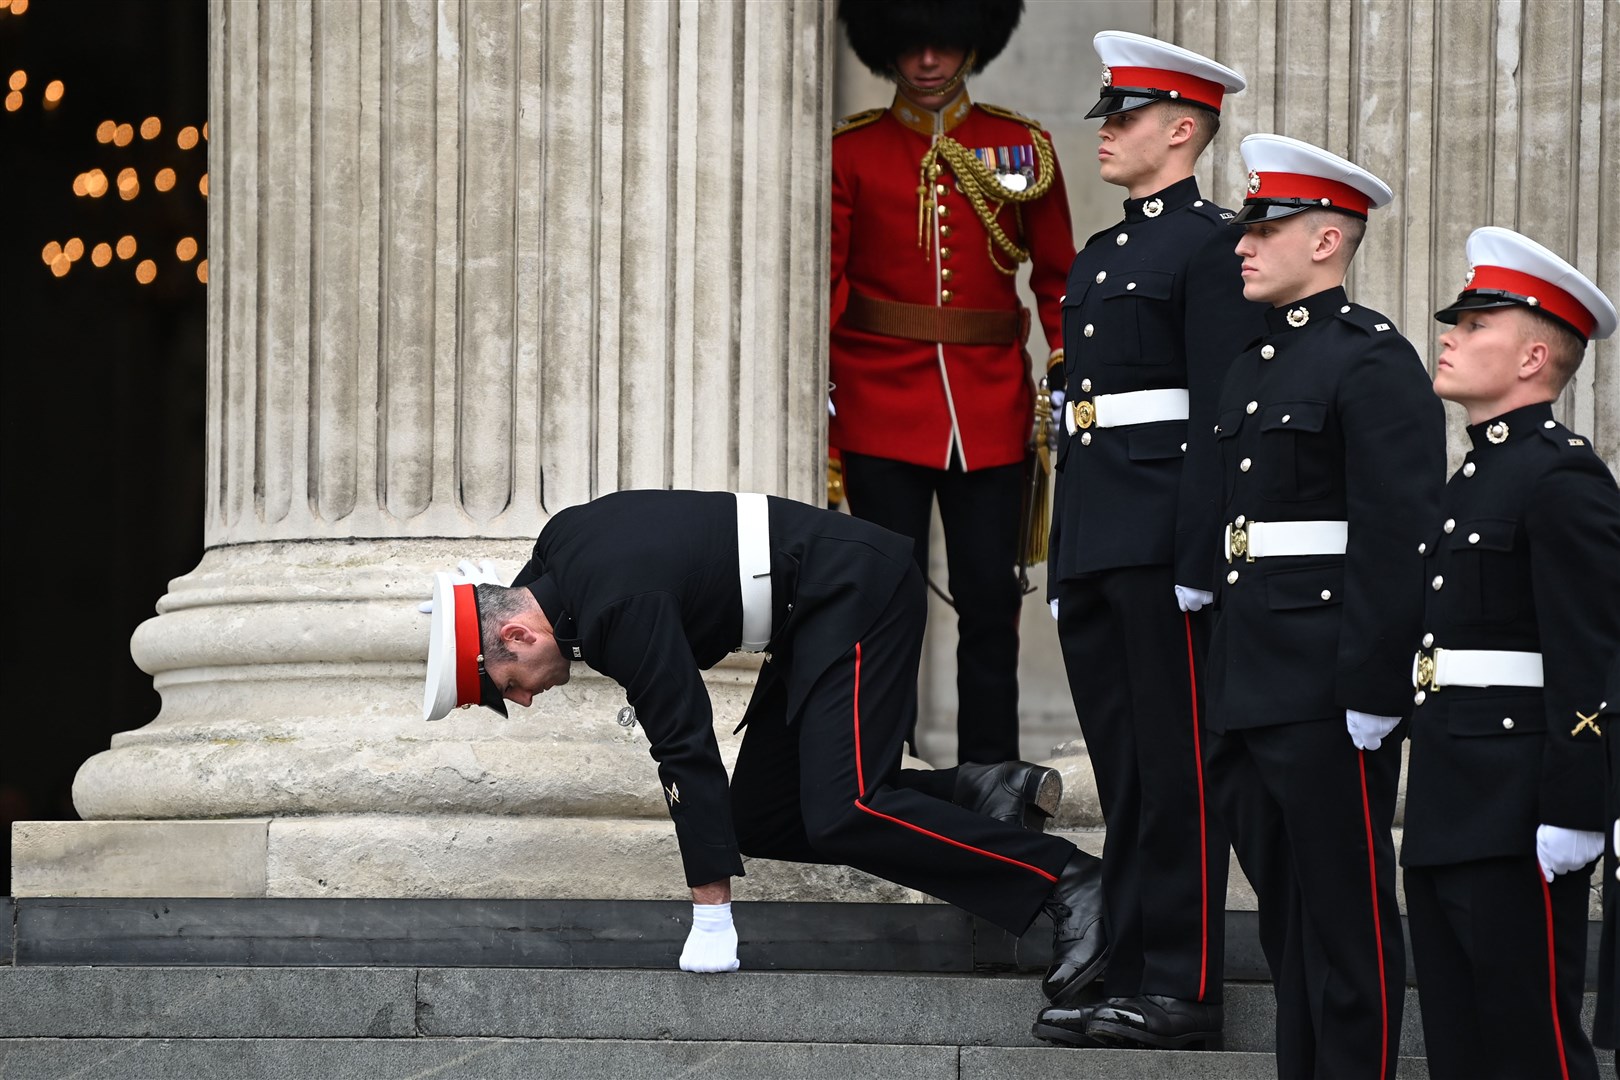 A member of the military stumbles on the steps of St Paul’s (Daniel Leal/PA)